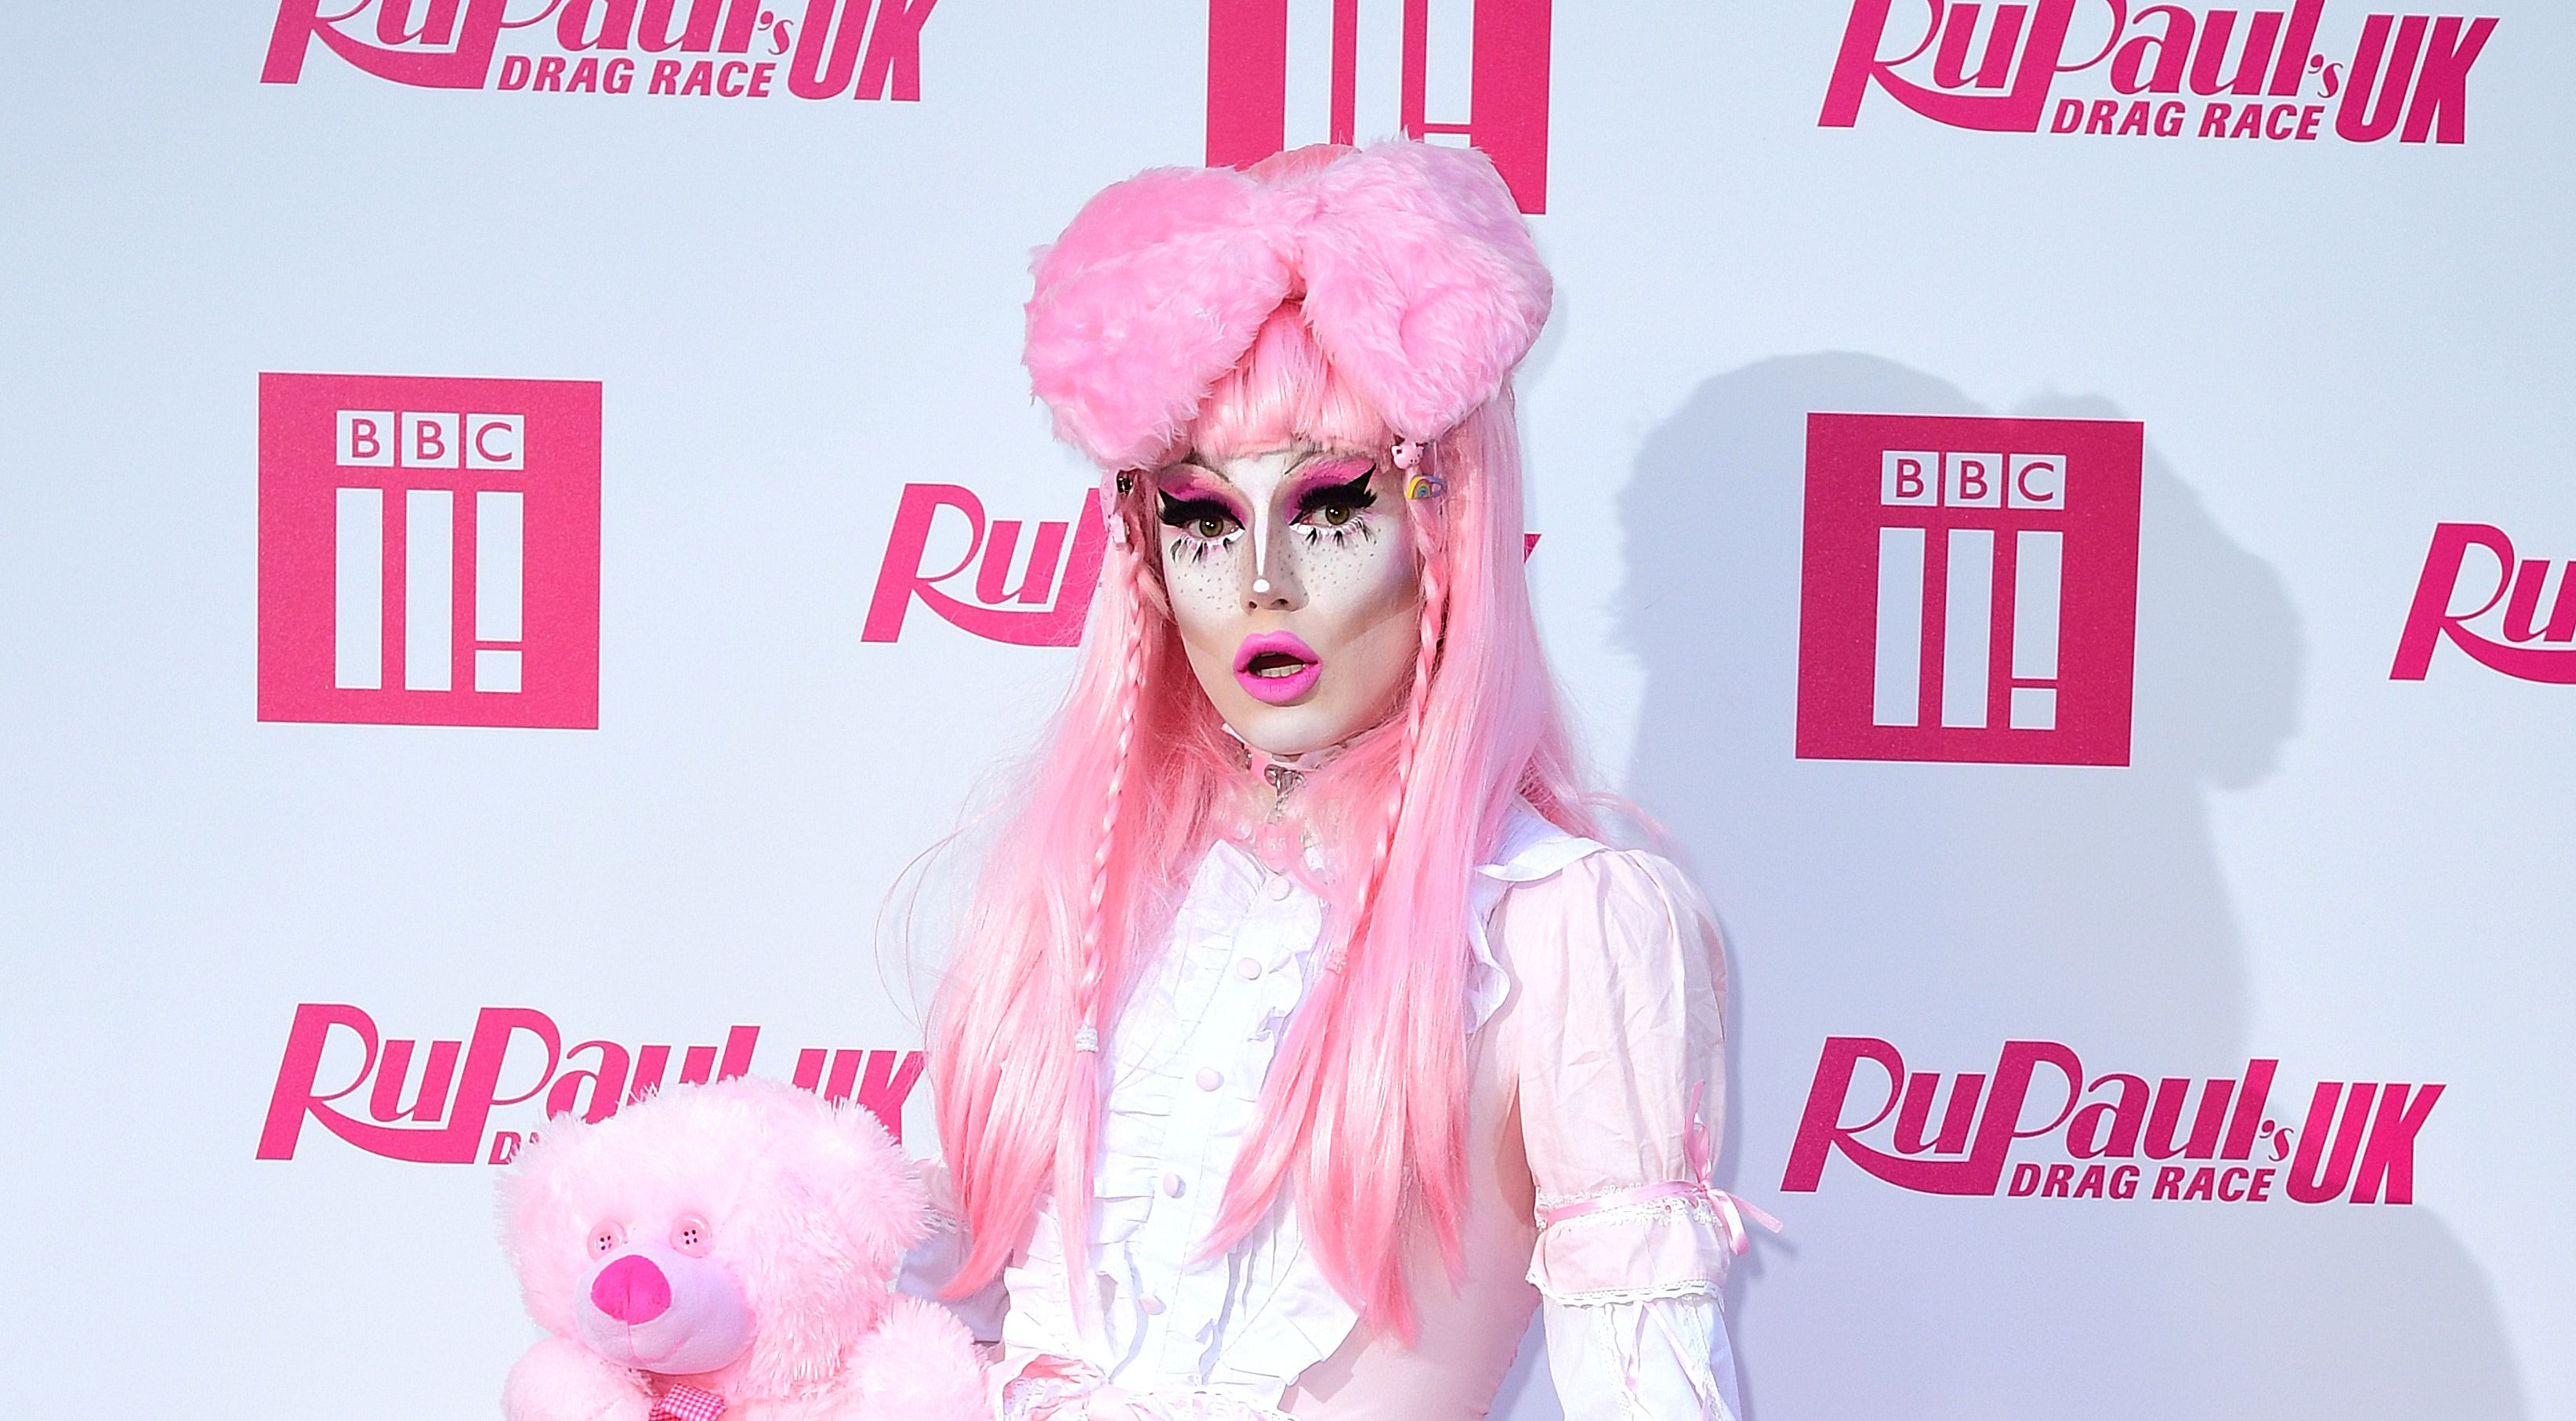 Scaredy Kat is bringing bisexual representation to Drag Race UK - GAY TIMES